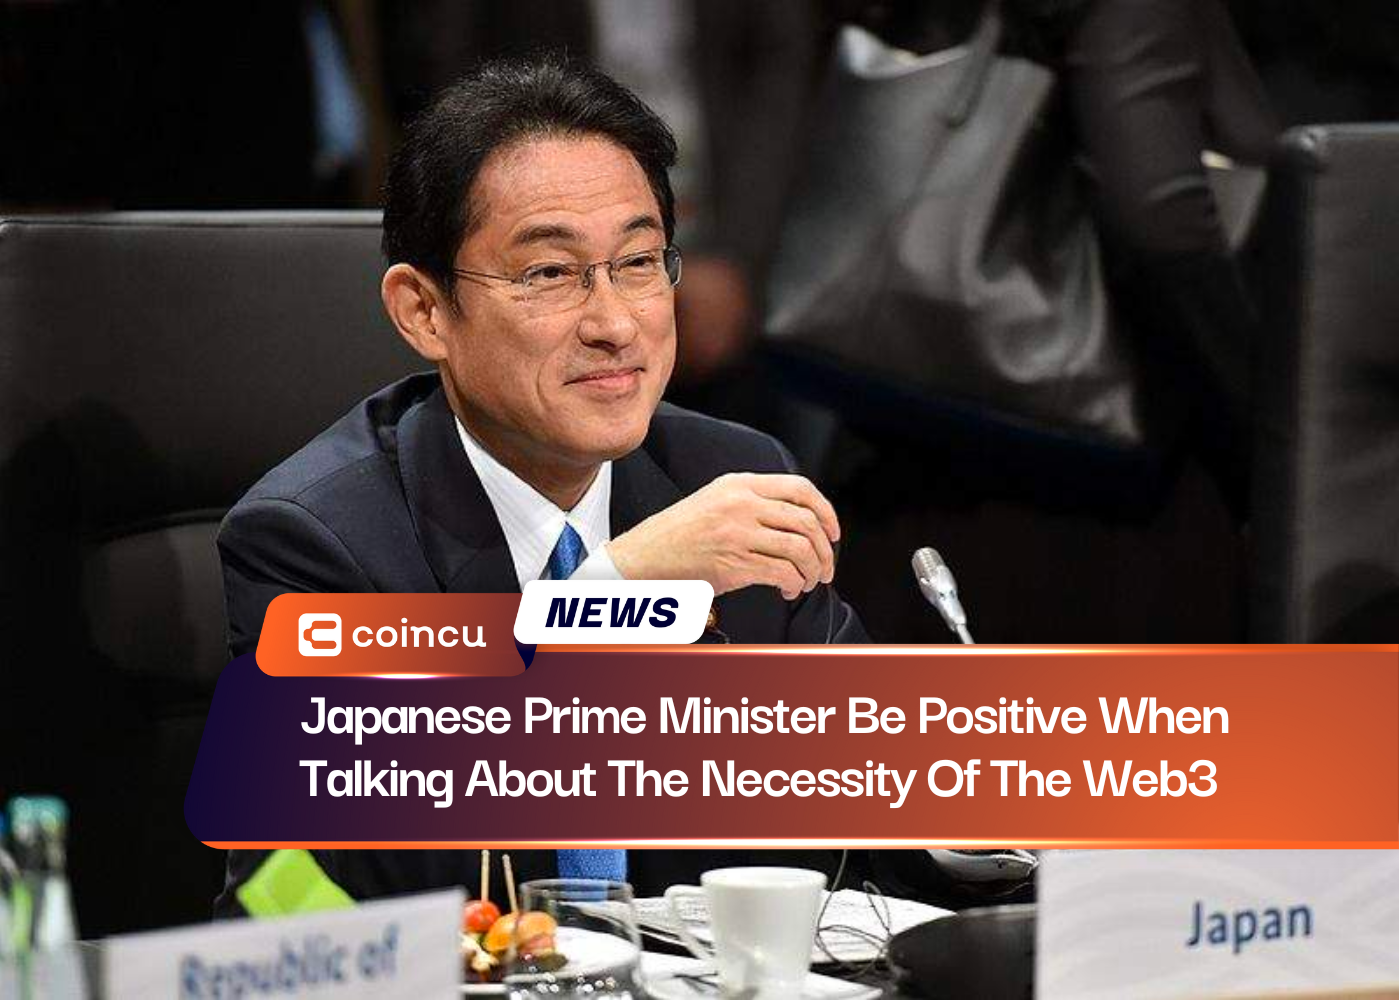 Japanese Prime Minister Be Positive When Talking About The Necessity Of The Web3